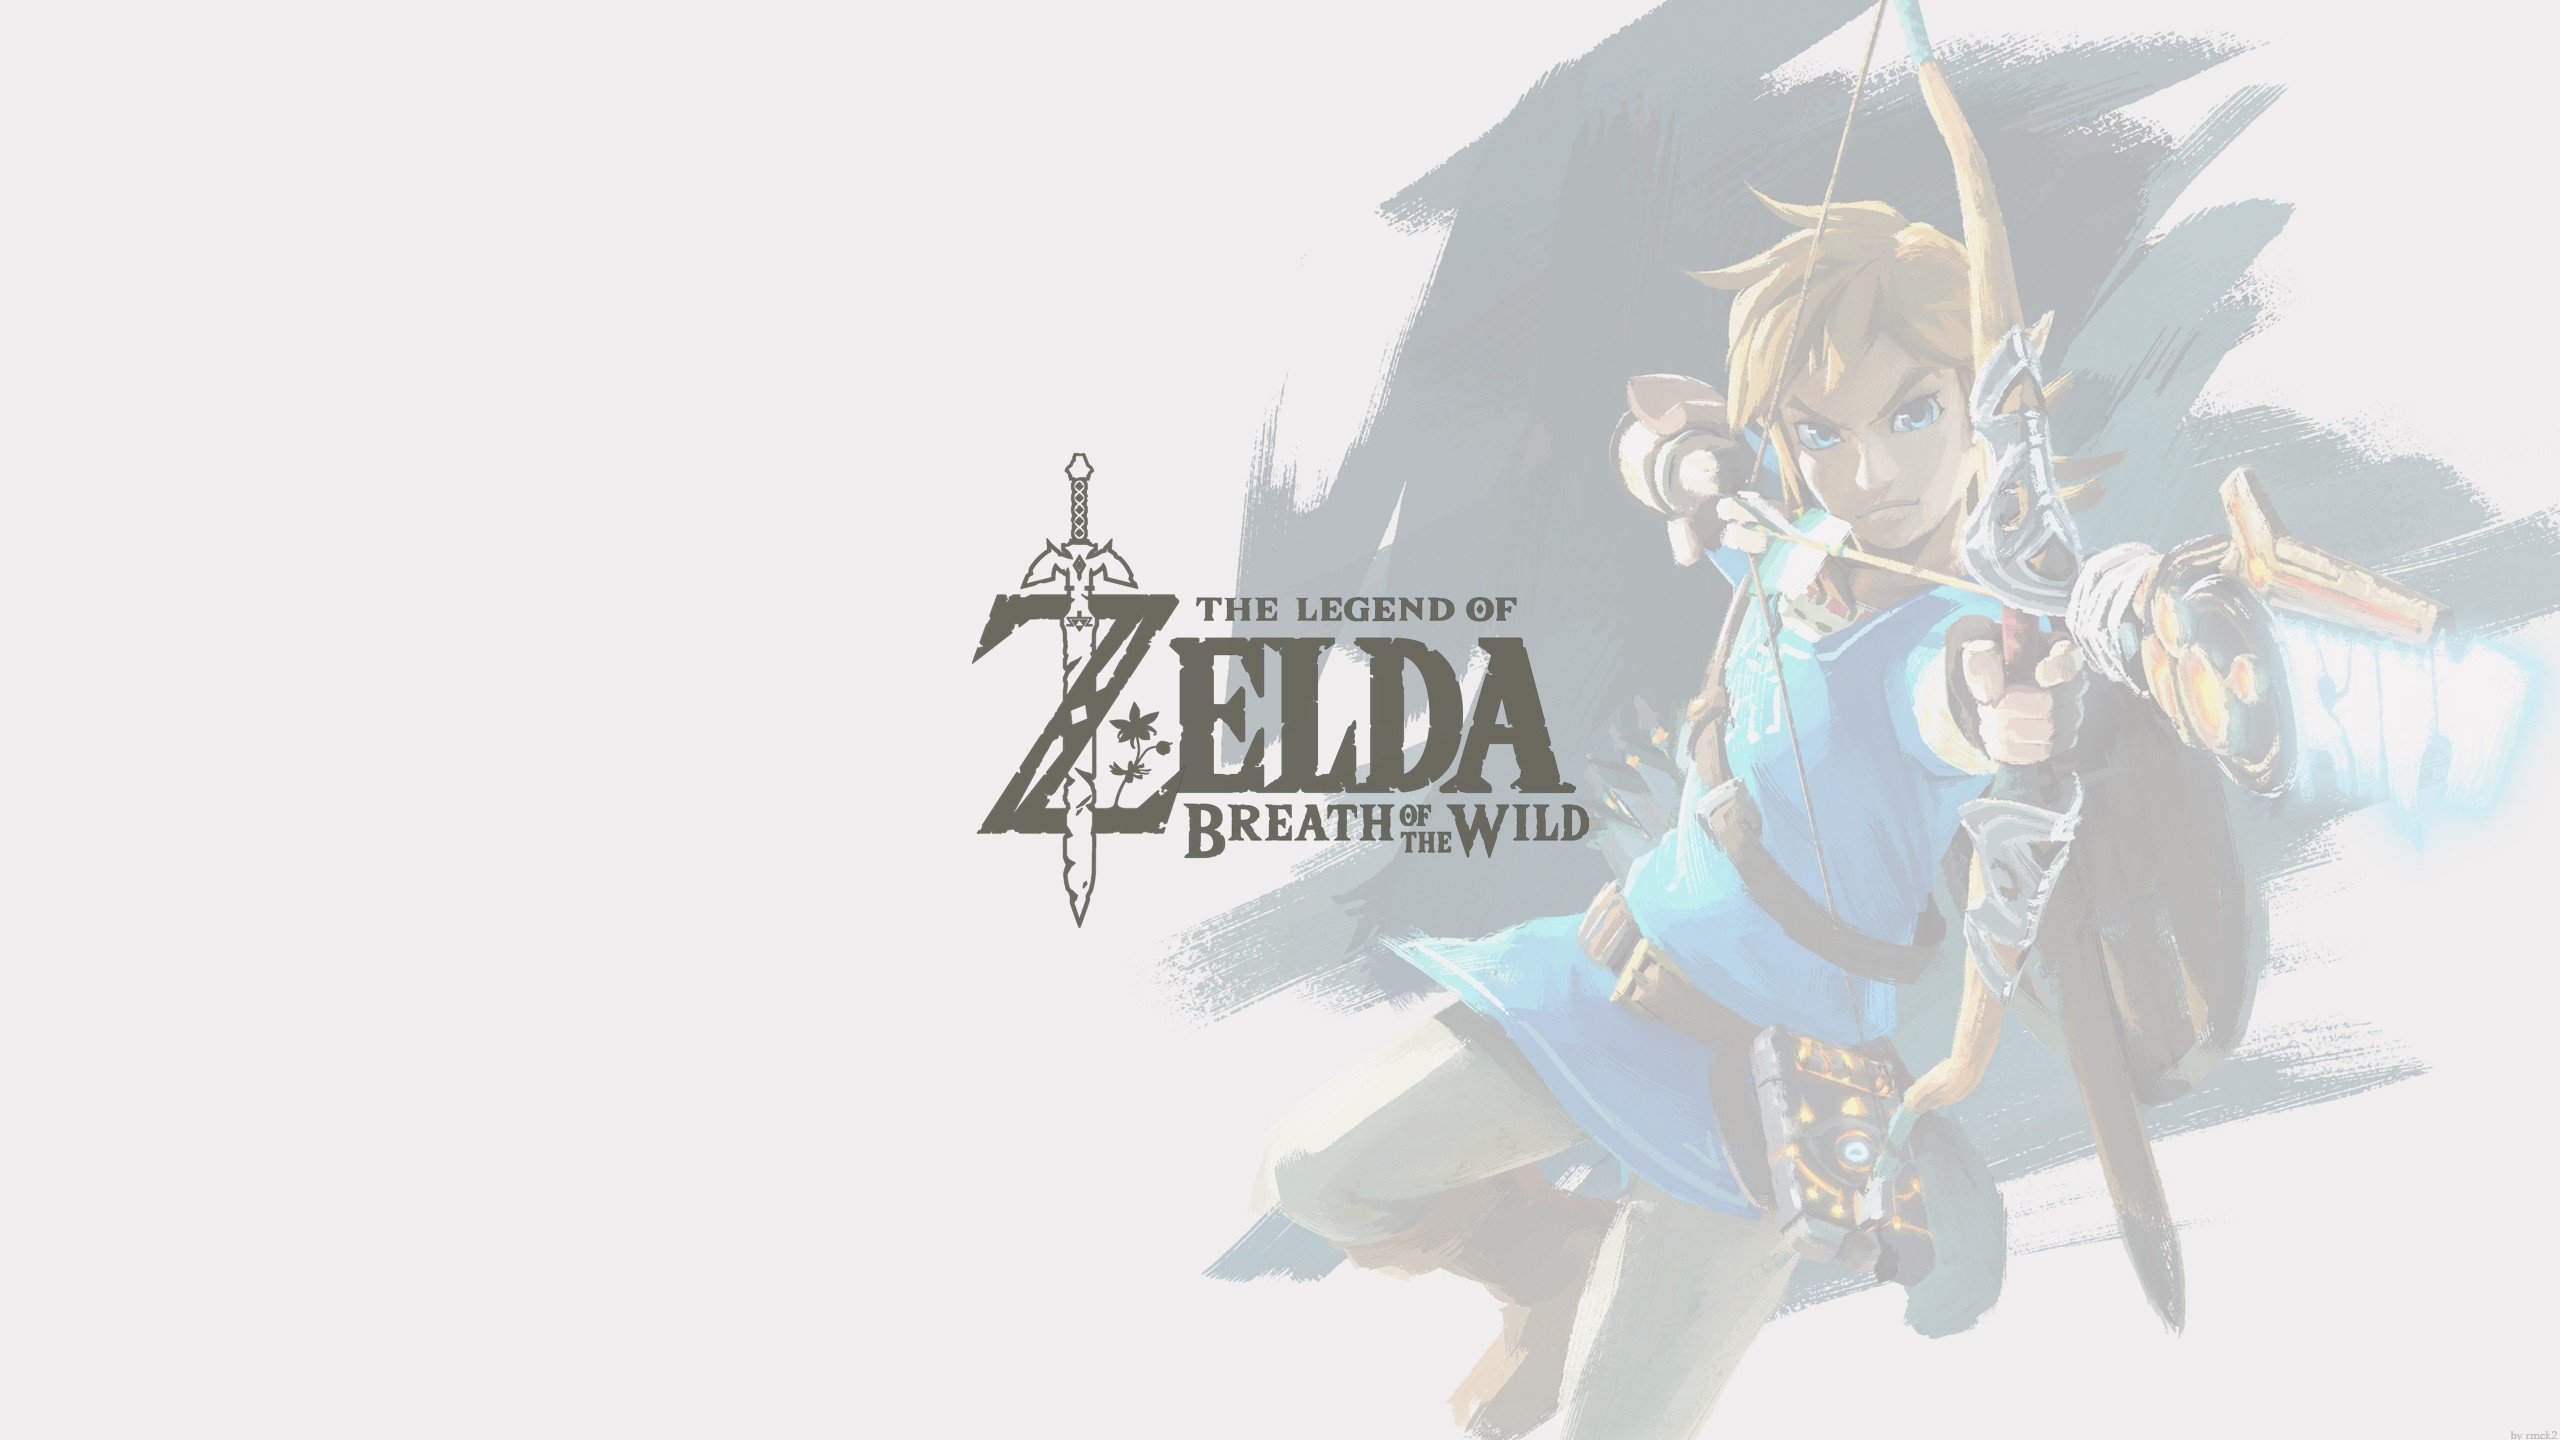 Zelda, The Legend of Zelda, The Legend of Zelda Breath of the Wild, Tloz, Video games, Simple background Wallpaper